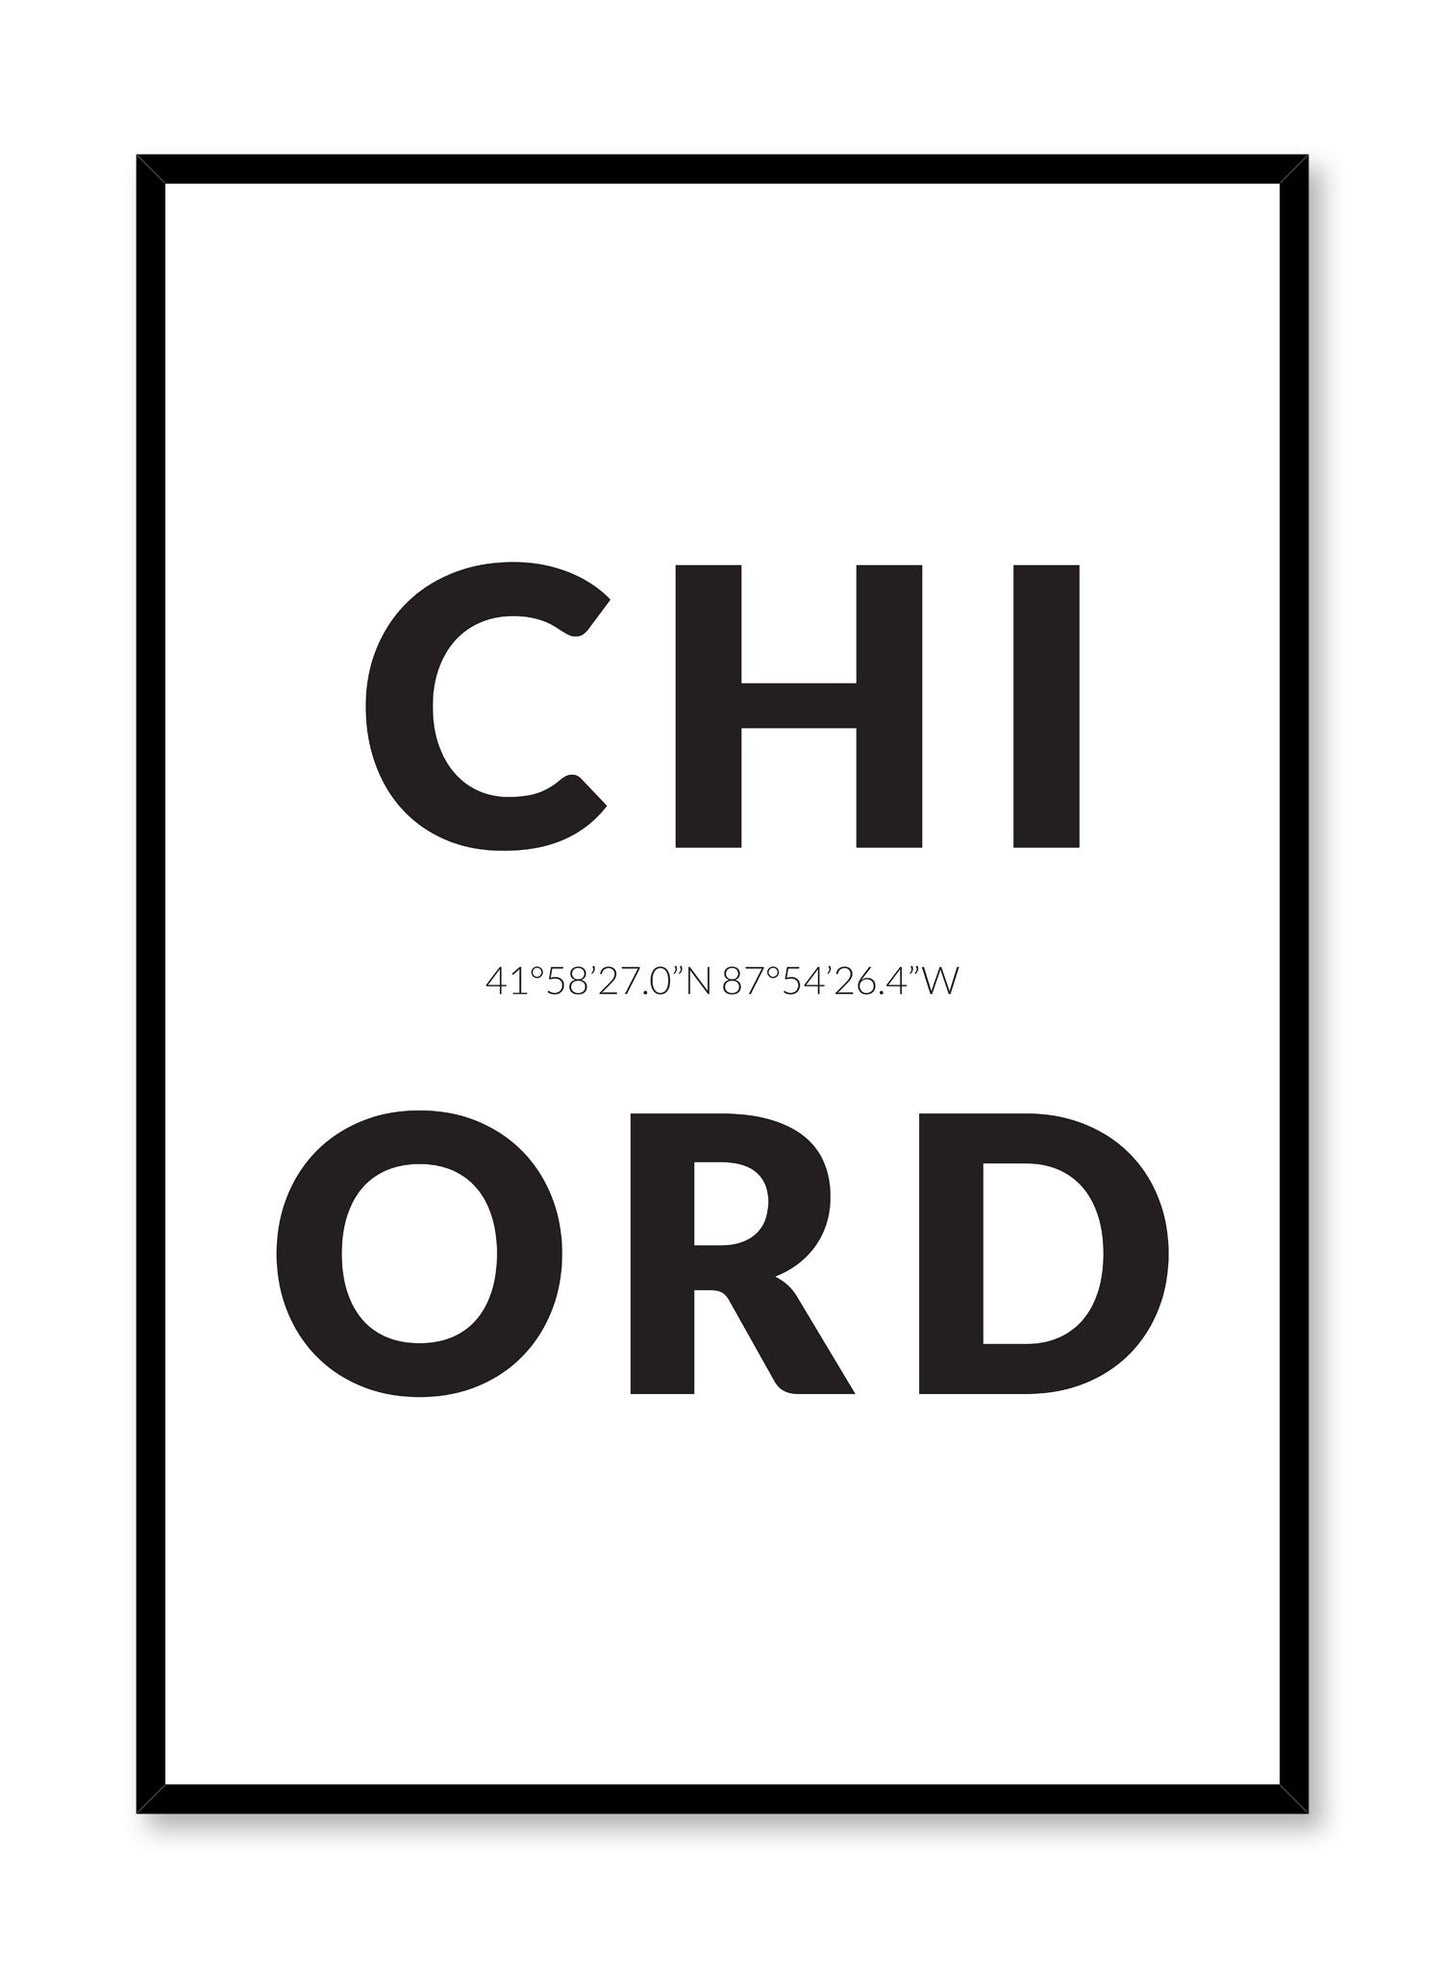 Minimalist design poster by Opposite Wall with airport code Chicago ORD